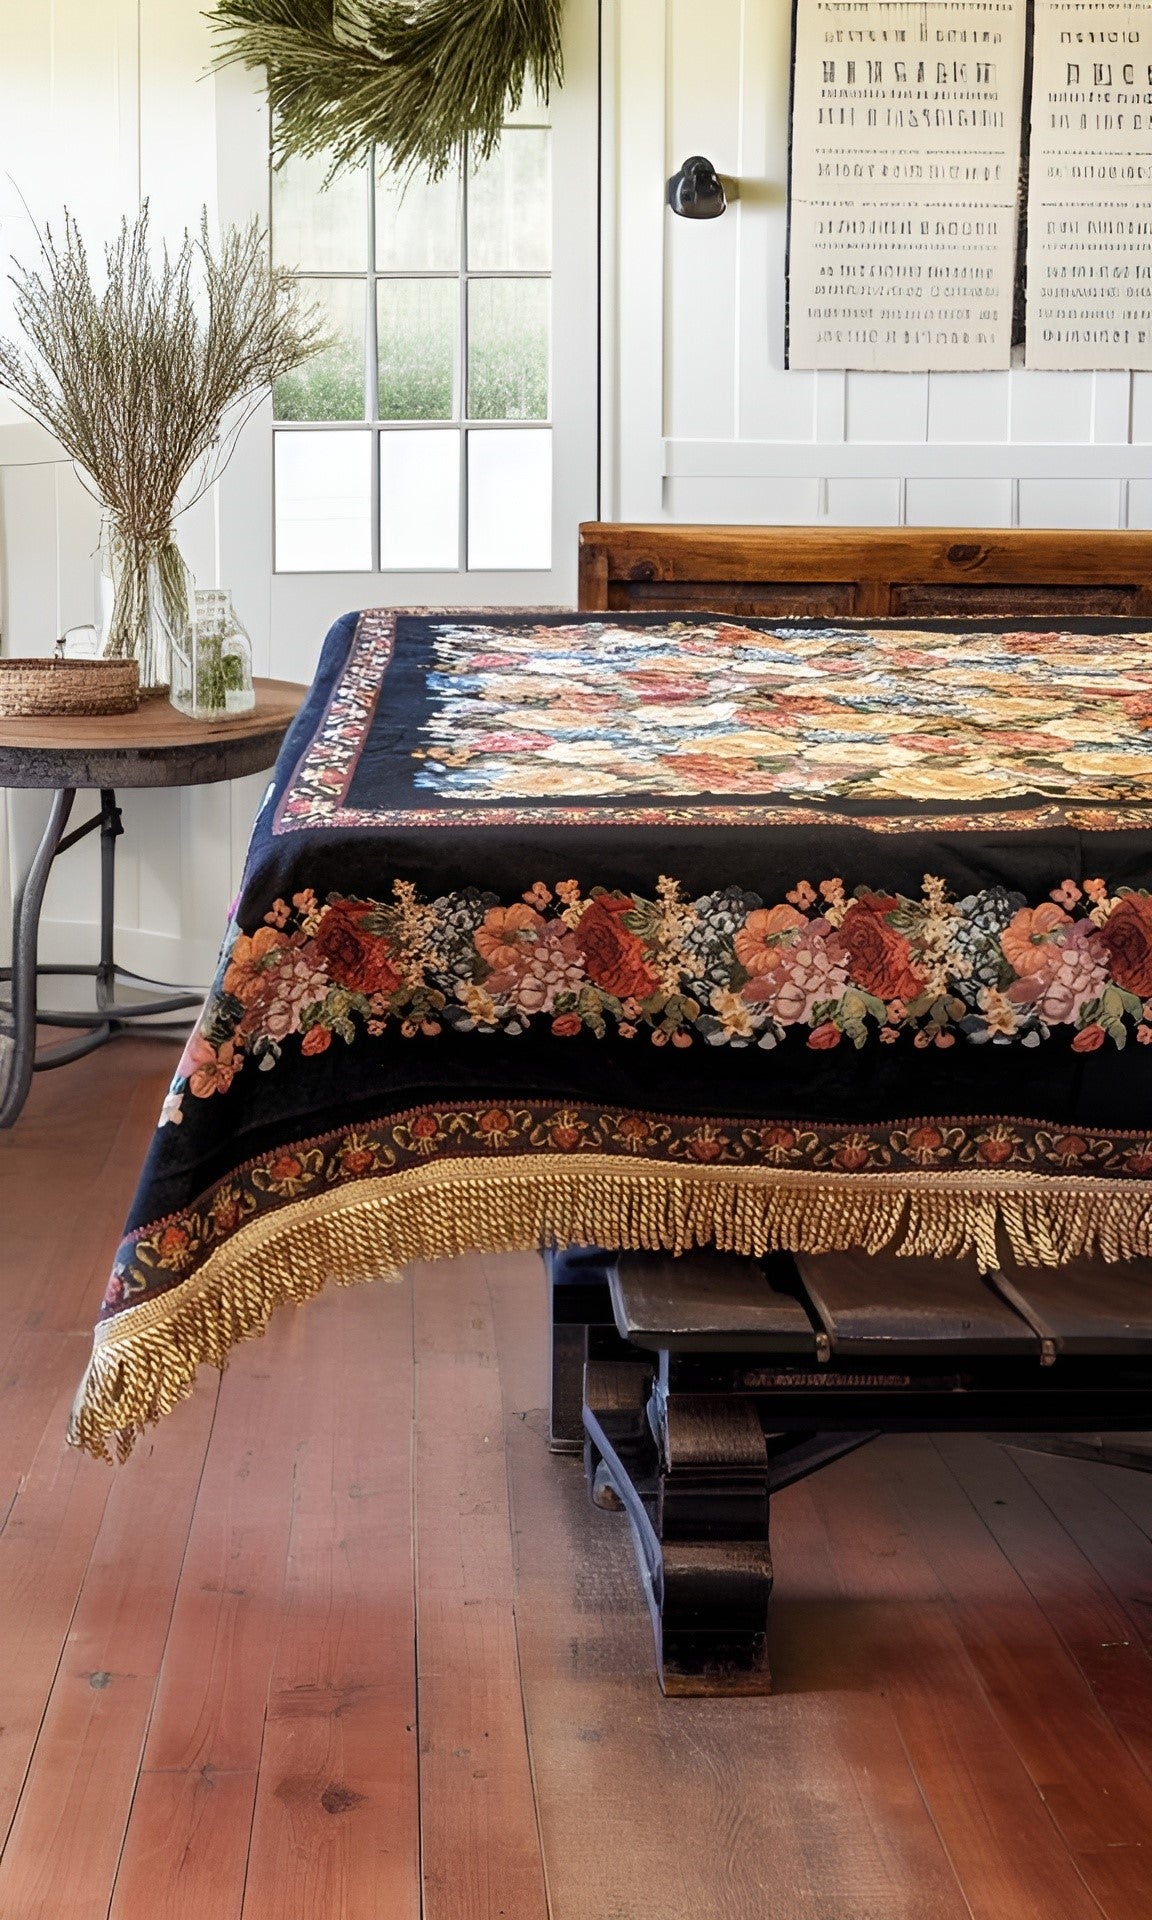 Tache Country Rustic Floral Black Midnight Awakening Tablecloth (3089BL) - Tache Home Fashion